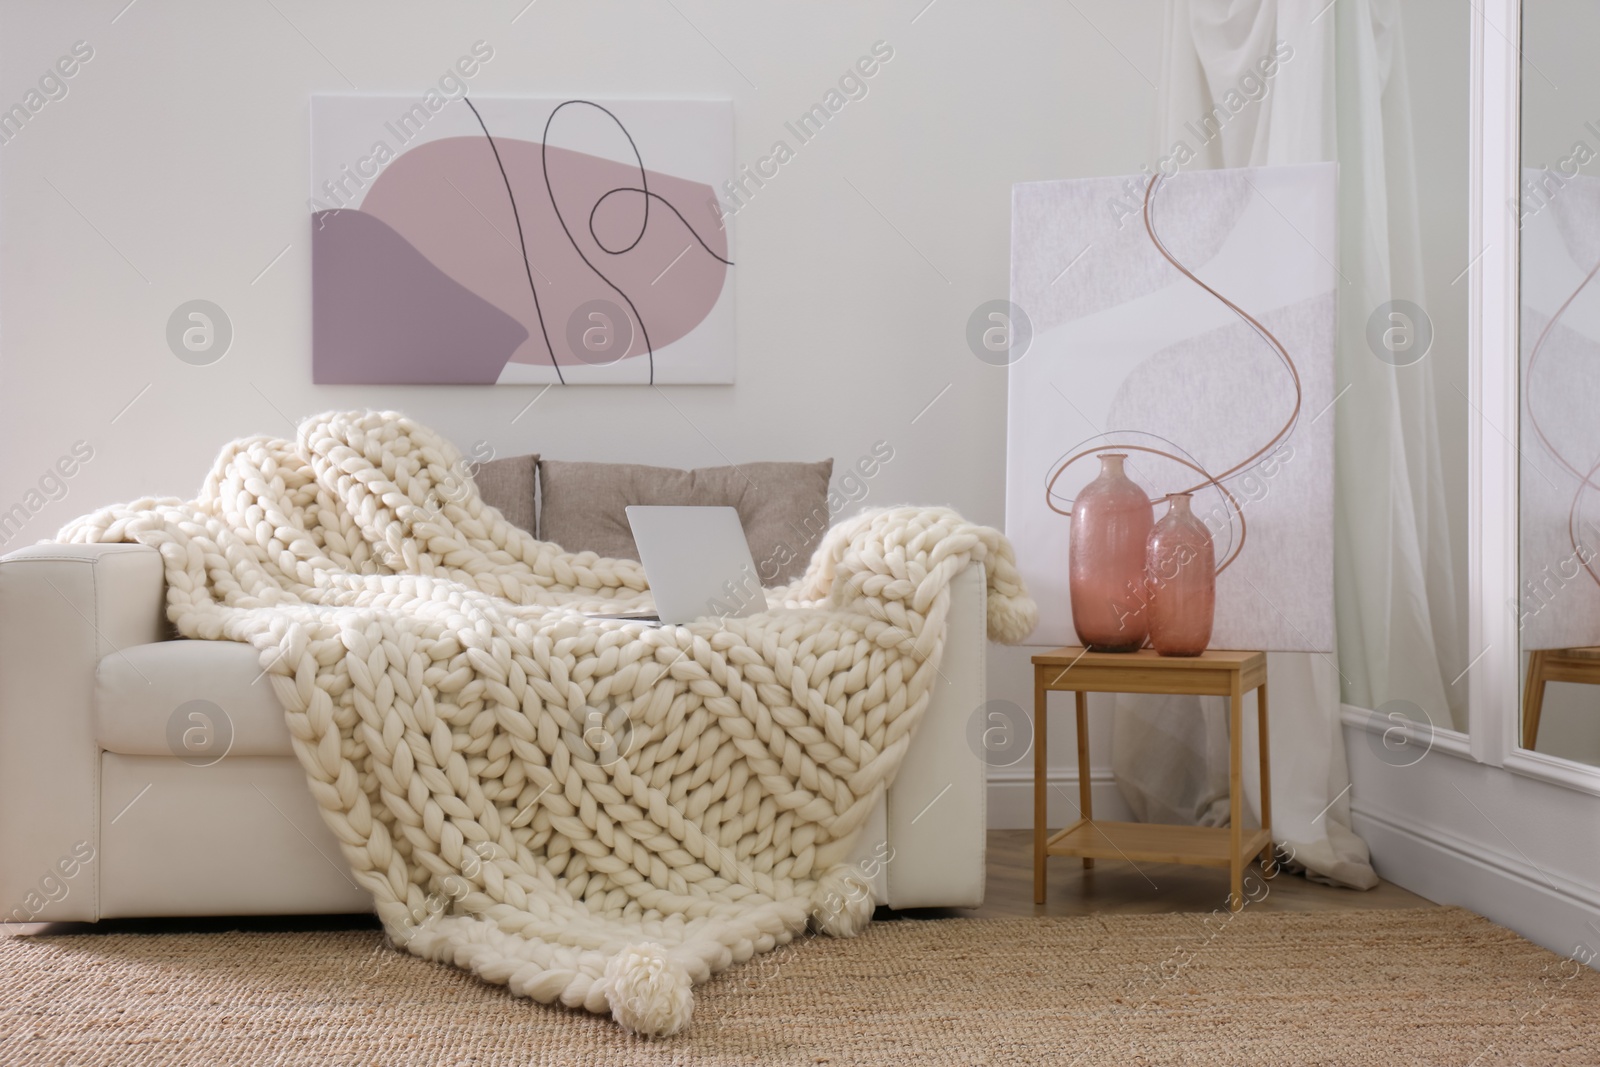 Photo of Soft knitted blanket and modern laptop on couch in living room. Interior element